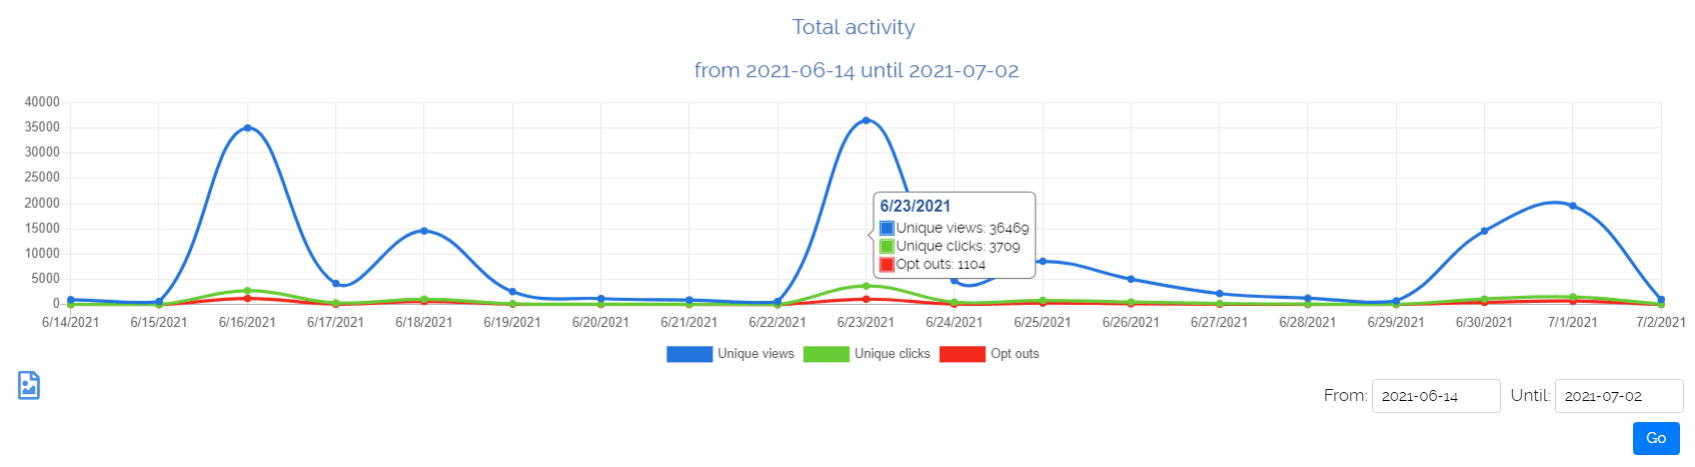 The total activity report